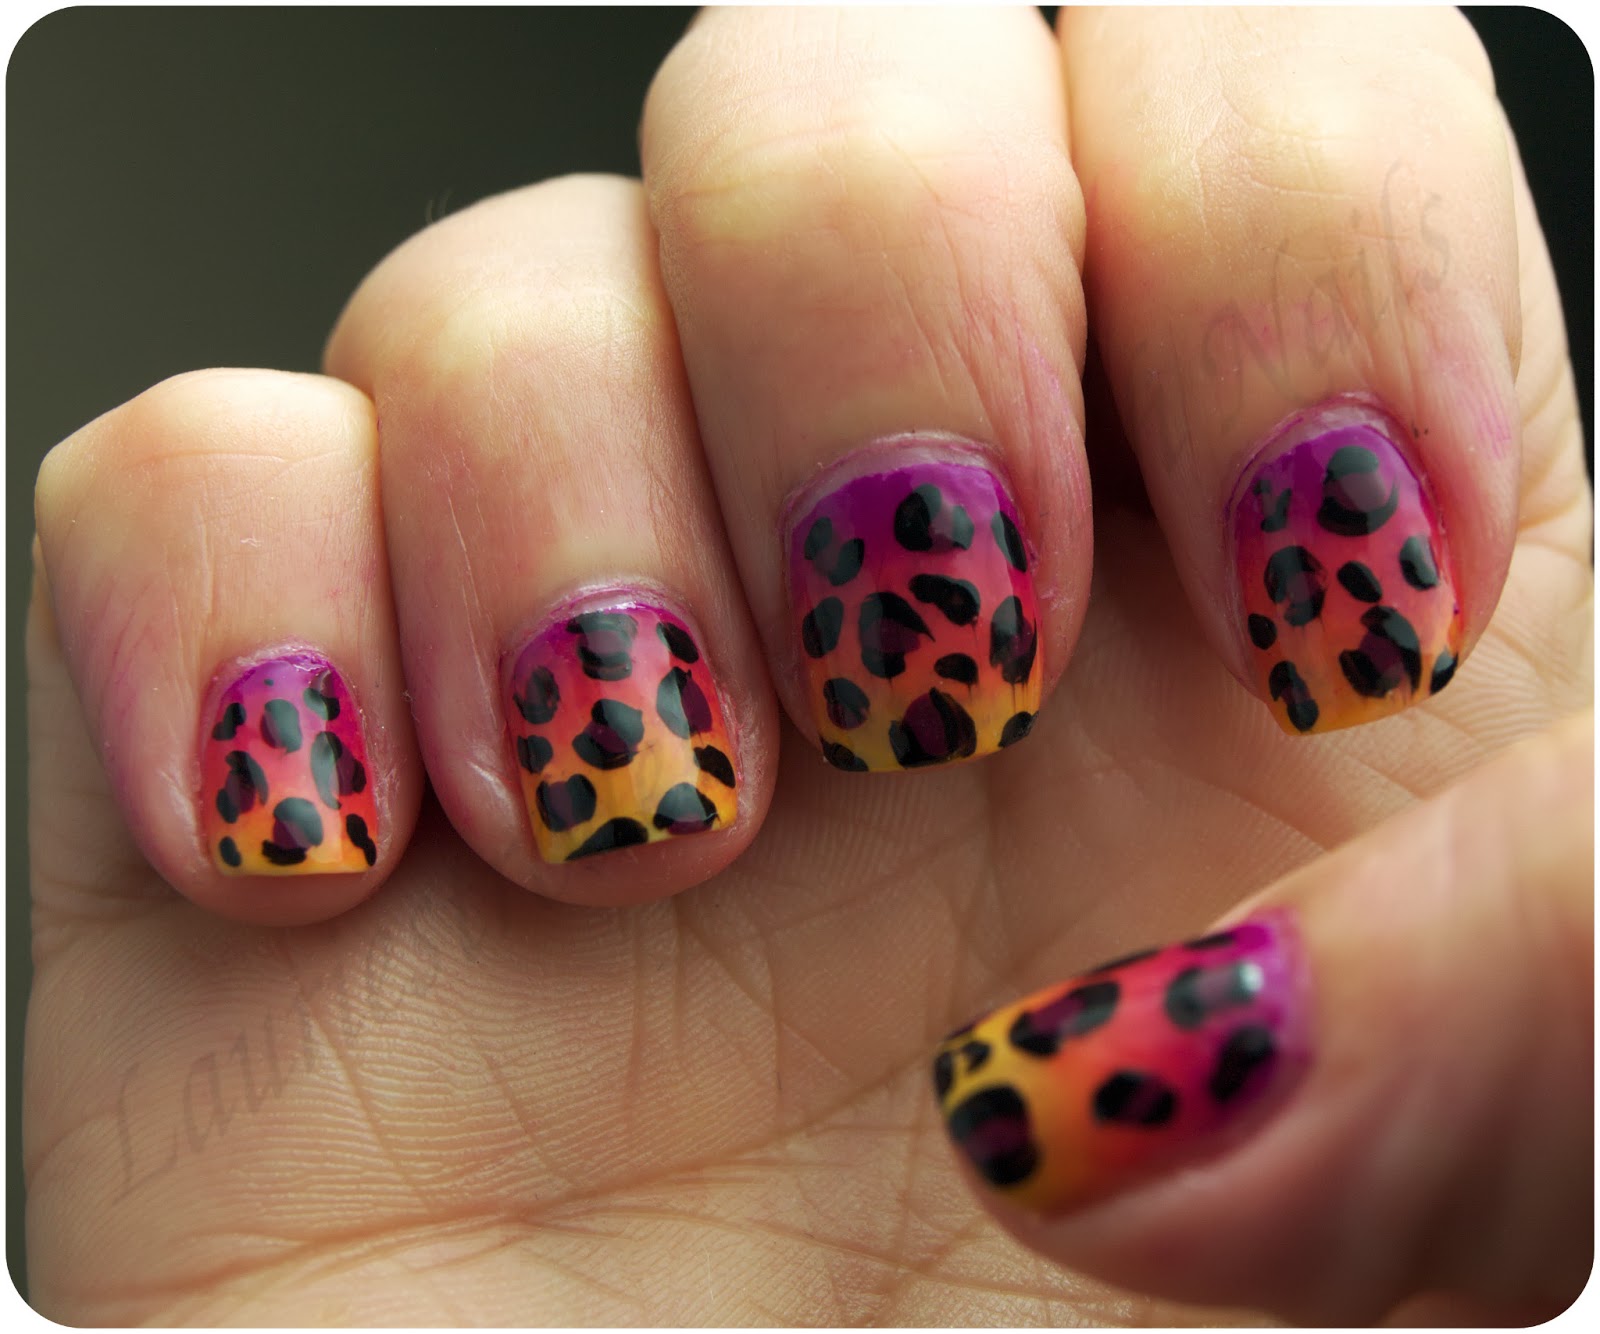 Lauriestrodes Fun With Nails: Fancy Friday #4: Animal Print